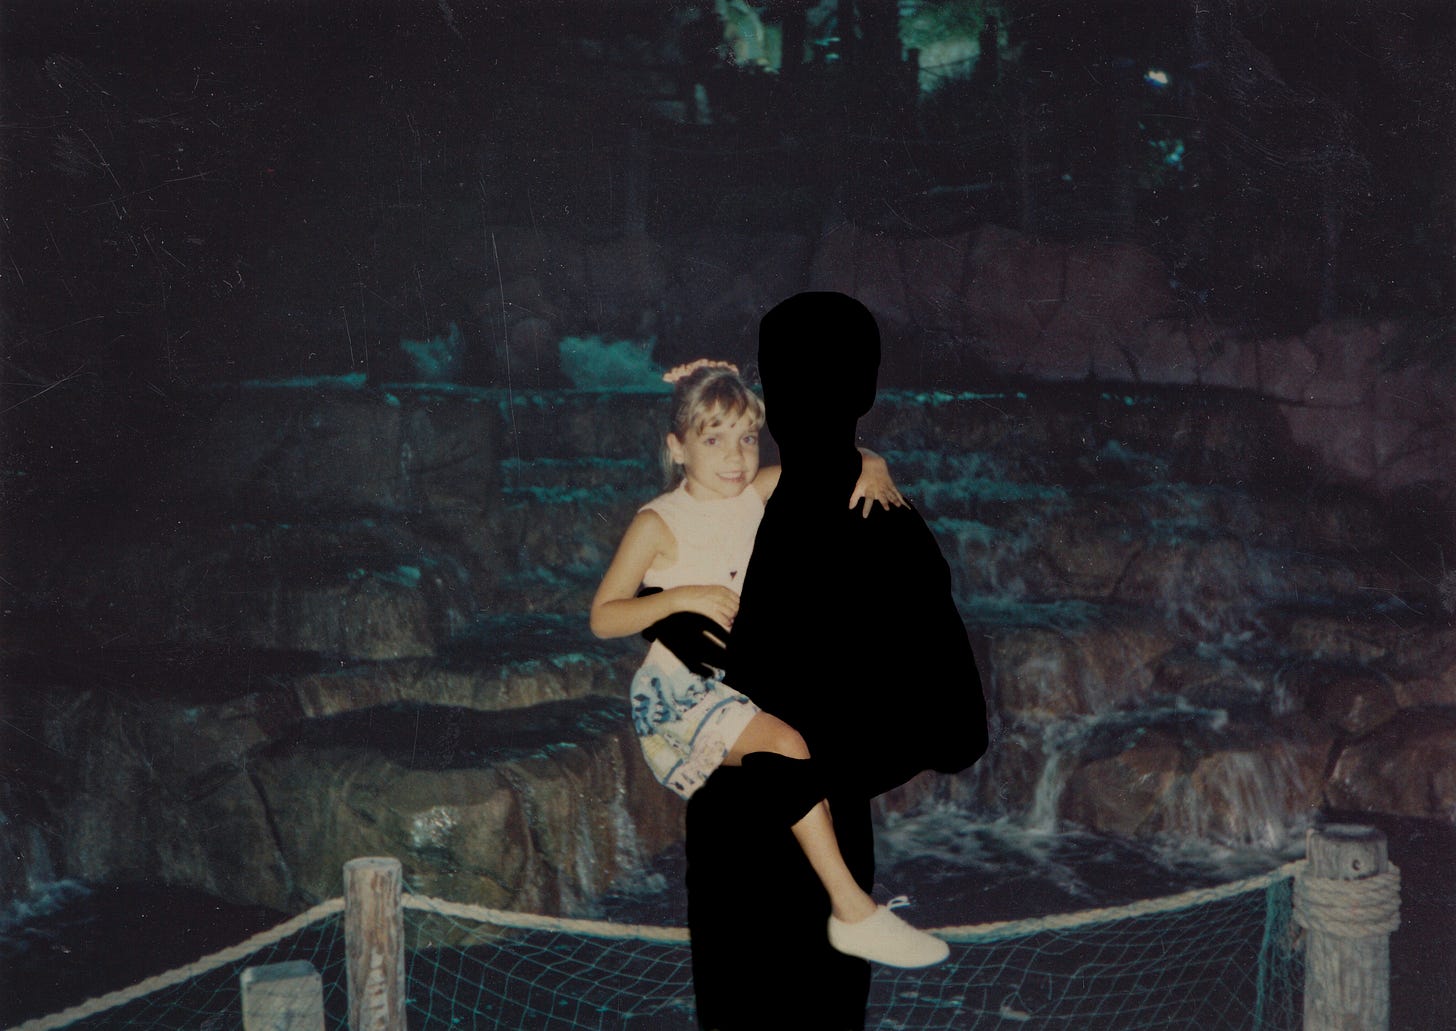 My brother and I at a mini golf waterfall at night. He is silhouetted and holding me. I am about 8 years old.